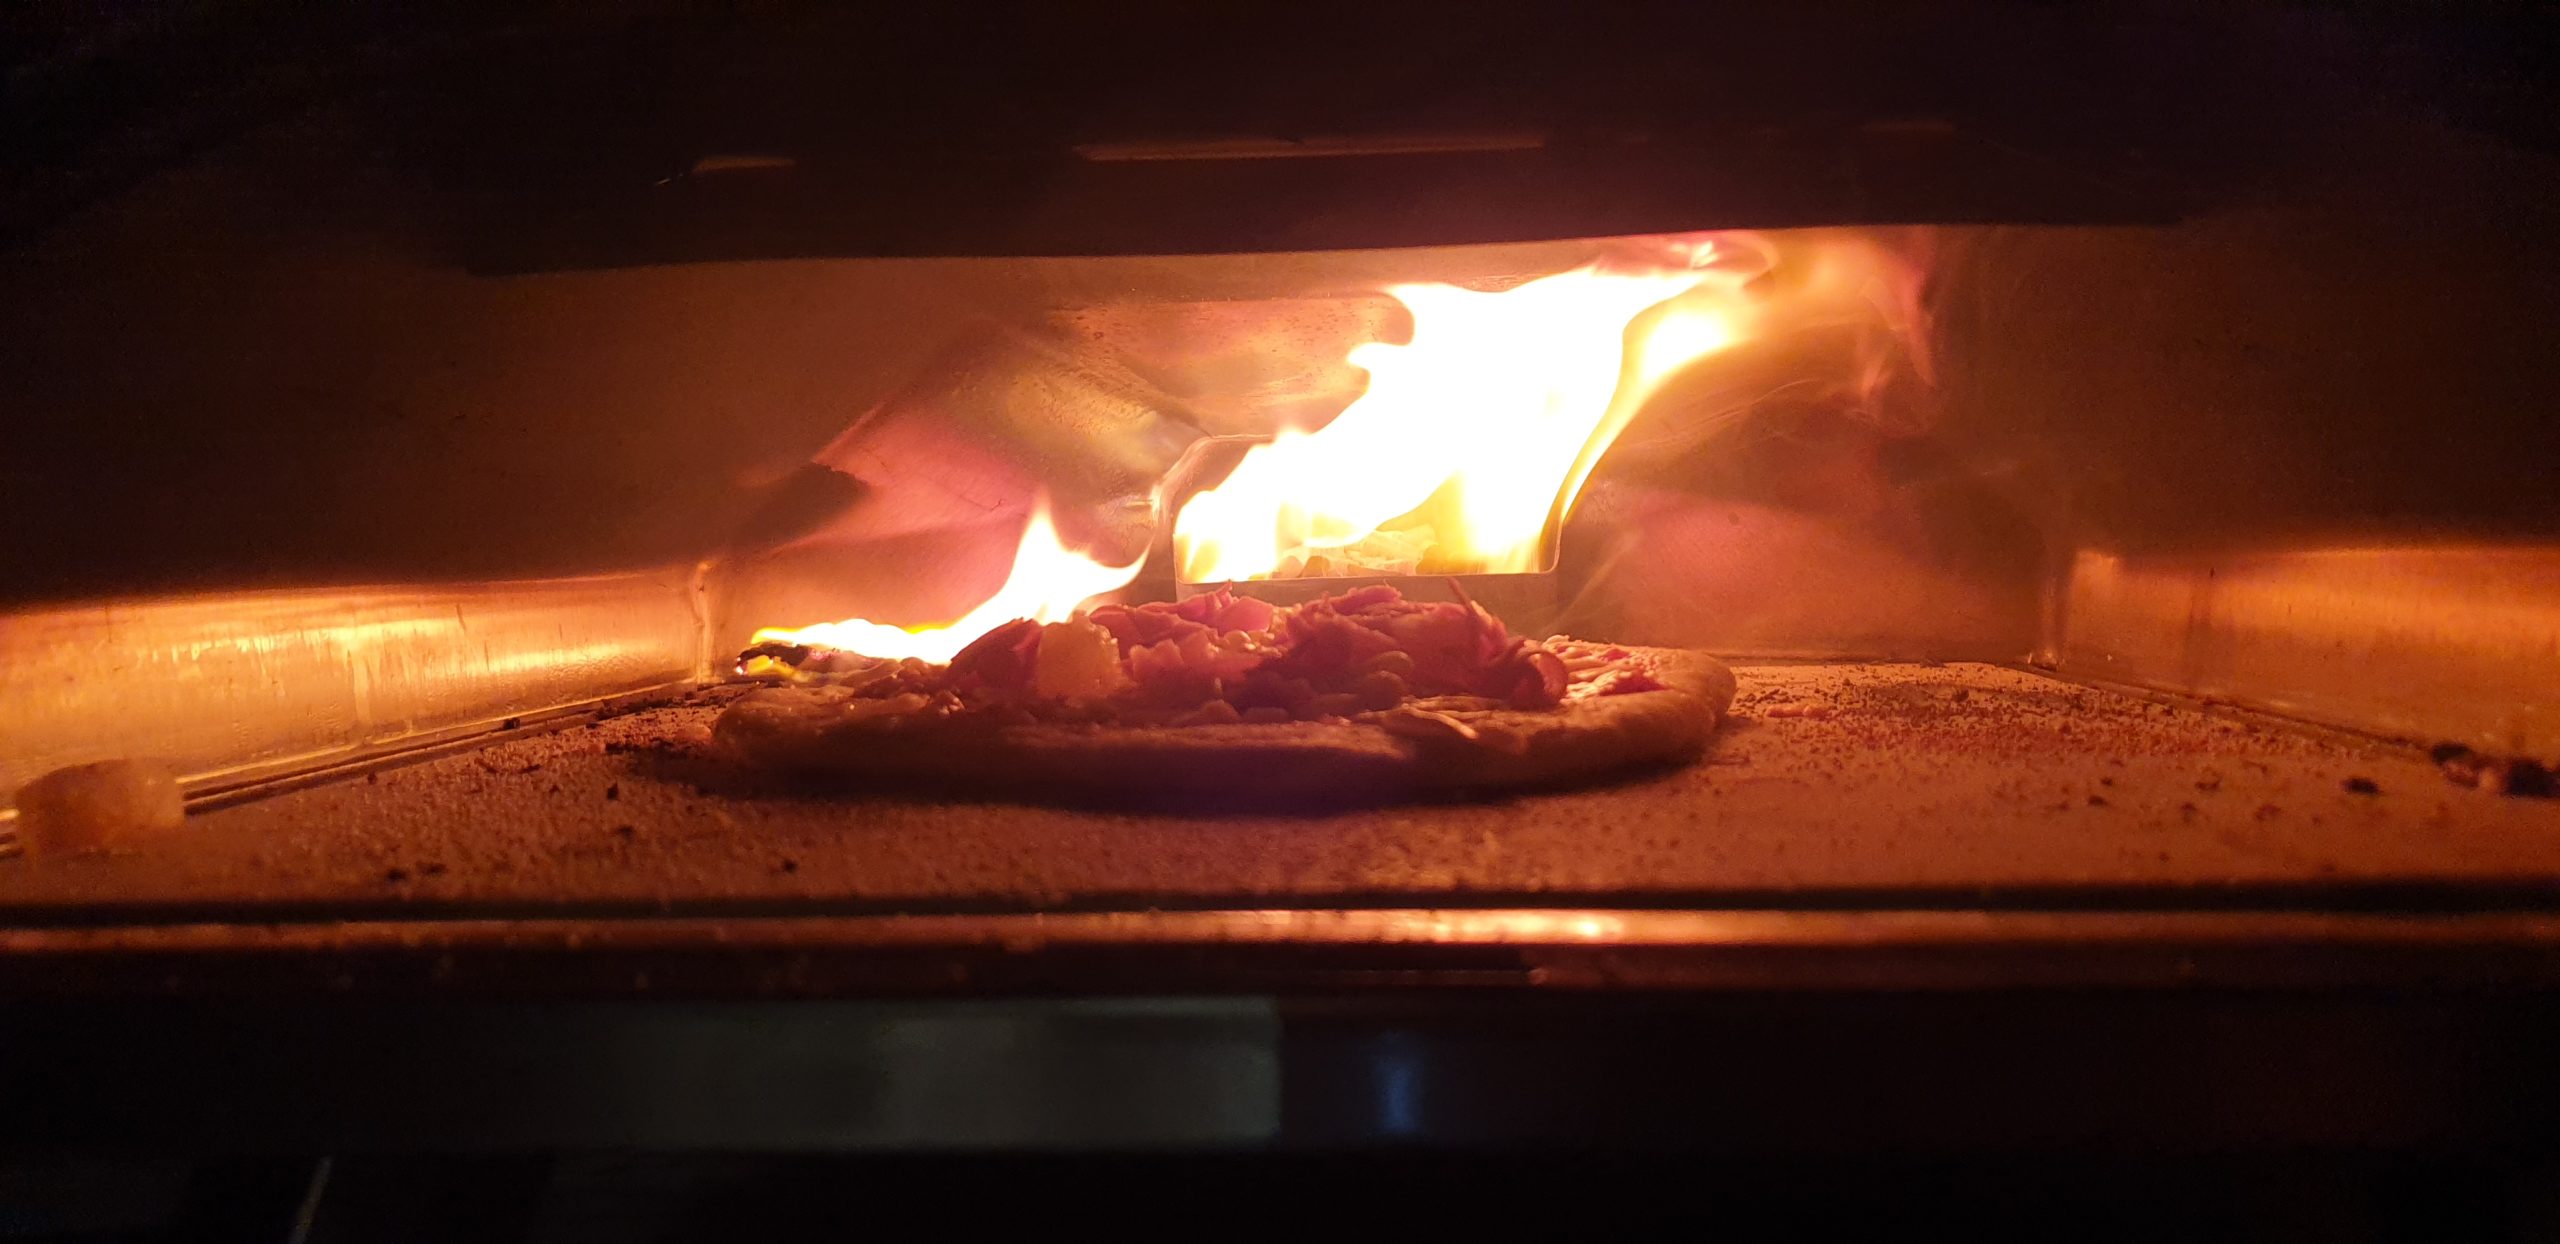 Pizza in an oven, fire raging behind and jumping onto the floor of the oven.